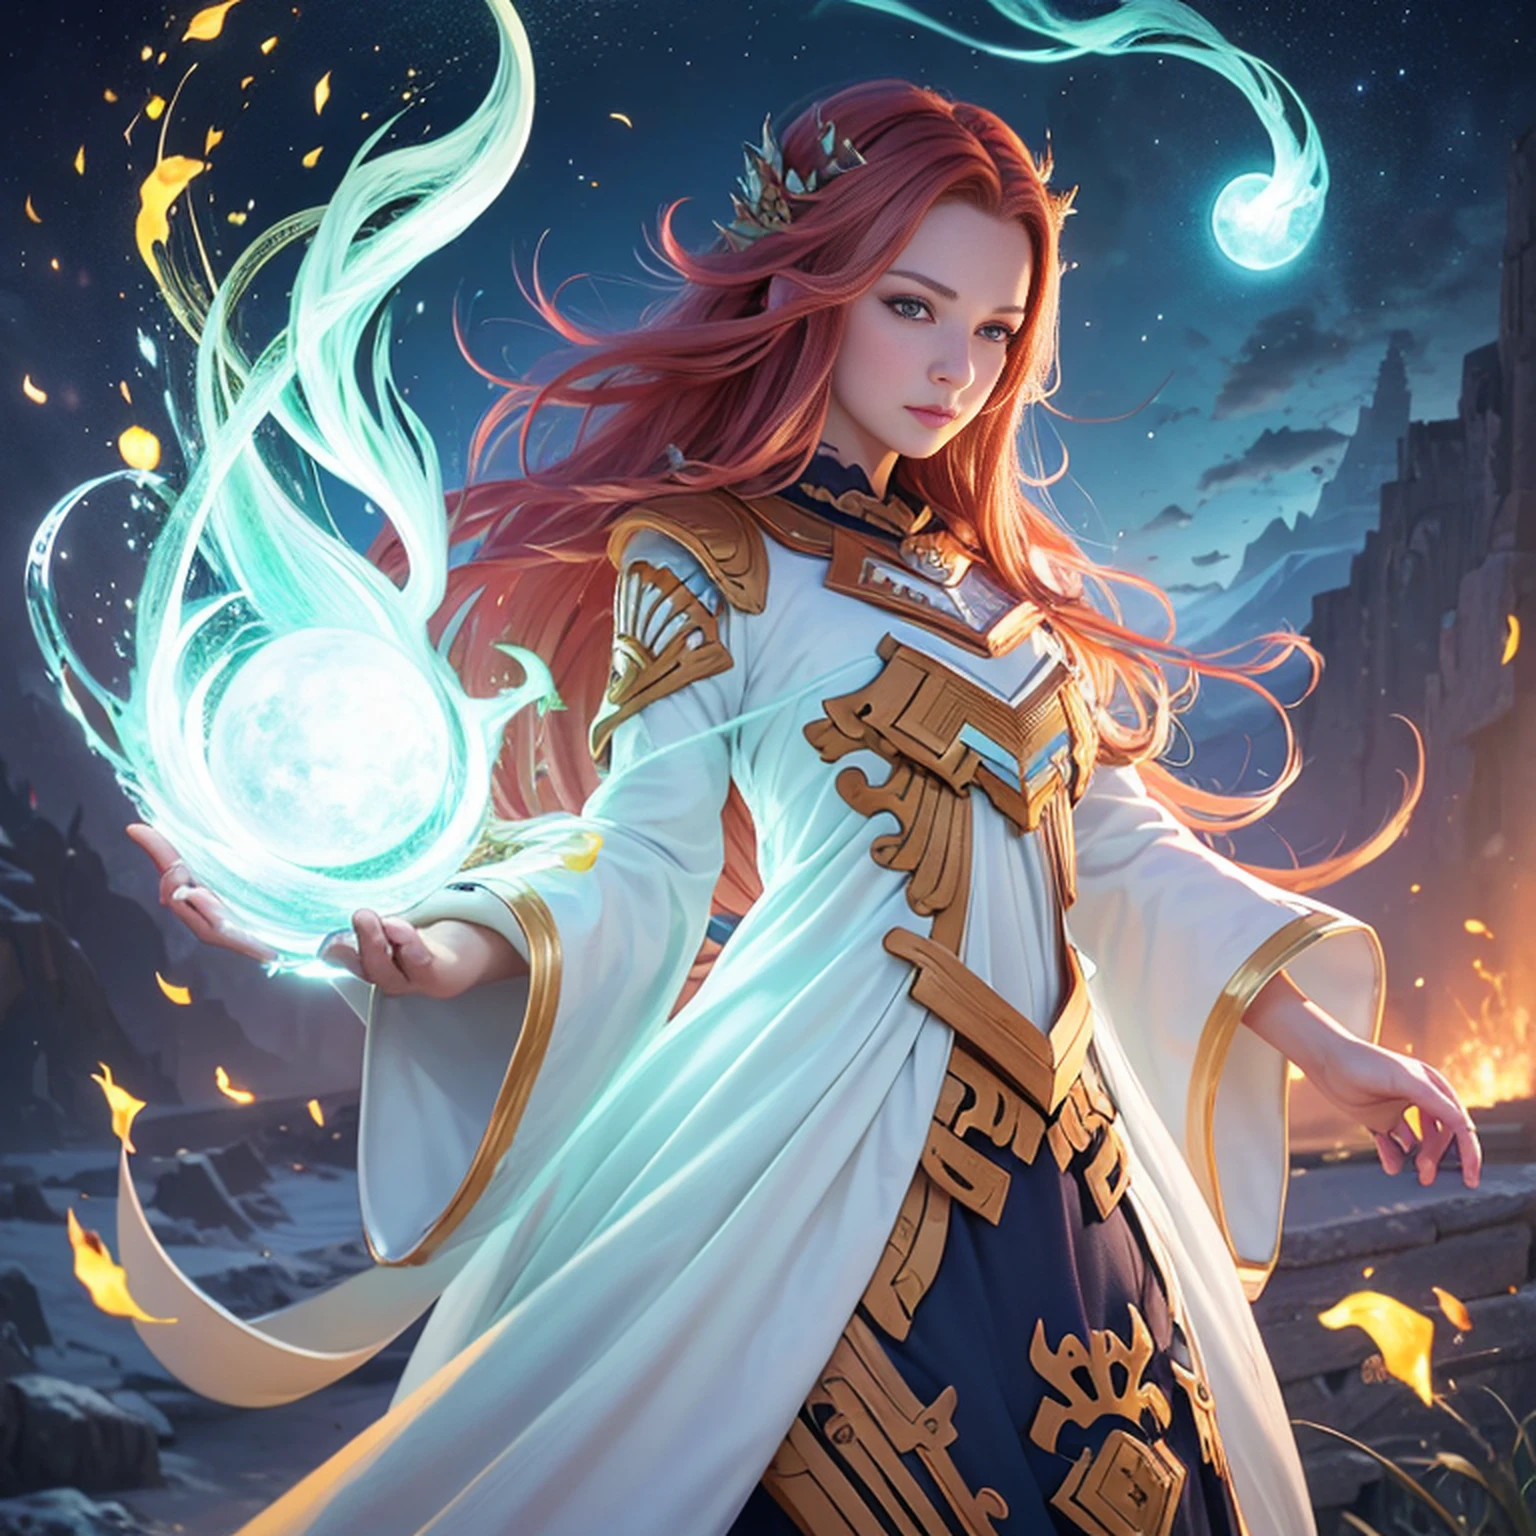 8k, ultra detaild, master part, best qualityer, (extremely detaild), Arafed, dnd art, scenic view, fully body, aasimar sorceress casting a flaming spell, aasimar, female, (masterpiece 1.3, intense details), female, enchantress, Casting Flaming Spell (masterpiece 1.3, intense details) big angelic wings, Open Blue Angelic Wings (masterpiece 1.3, intense details), magical fantasy background (masterpiece 1.5, intense details), moonligh, stele, nube, wearing white robe, purple cloak, flowing robe (masterpiece 1.3, intense details), High Heeled Boots (masterpiece 1.3, intense details), armed with personnel, red hair, greeneyes, olhos intensos, Female One, Ultra Detailed Face, (masterpiece 1.5, best qualityer), anatomically correcte (masterpiece 1.3, intense details), determined face, godly light, Cinematic lighting, smooth light, silhuette, fotorrealism, scenic view (masterpiece 1.3, intense details) , Wide-Angle, Ultra-Wide Angle, 8k, highres, best qualityer, High details @Vlademir Bernardes